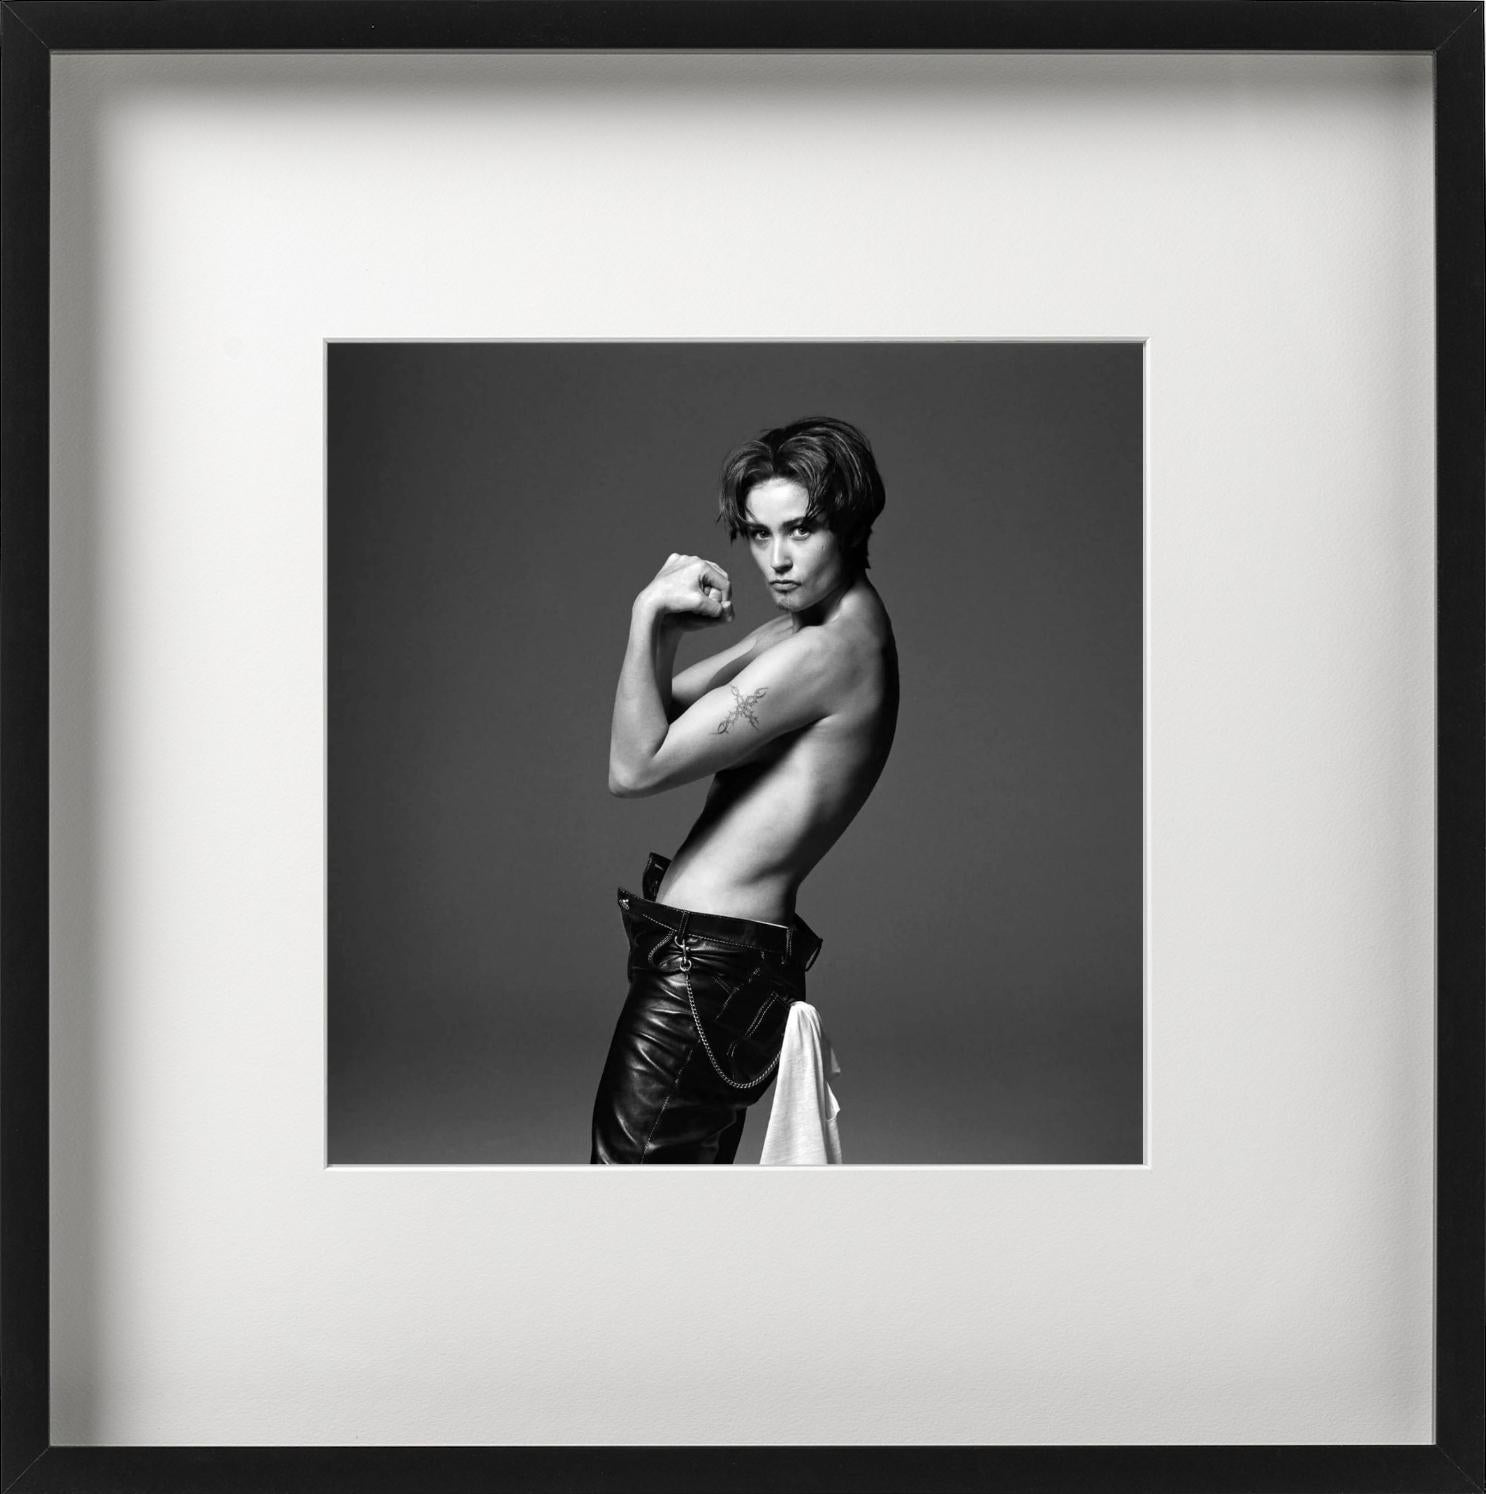 Demi Moore - model posing topless in leather pants, black-and-white photograph - Photograph by Michel Comte